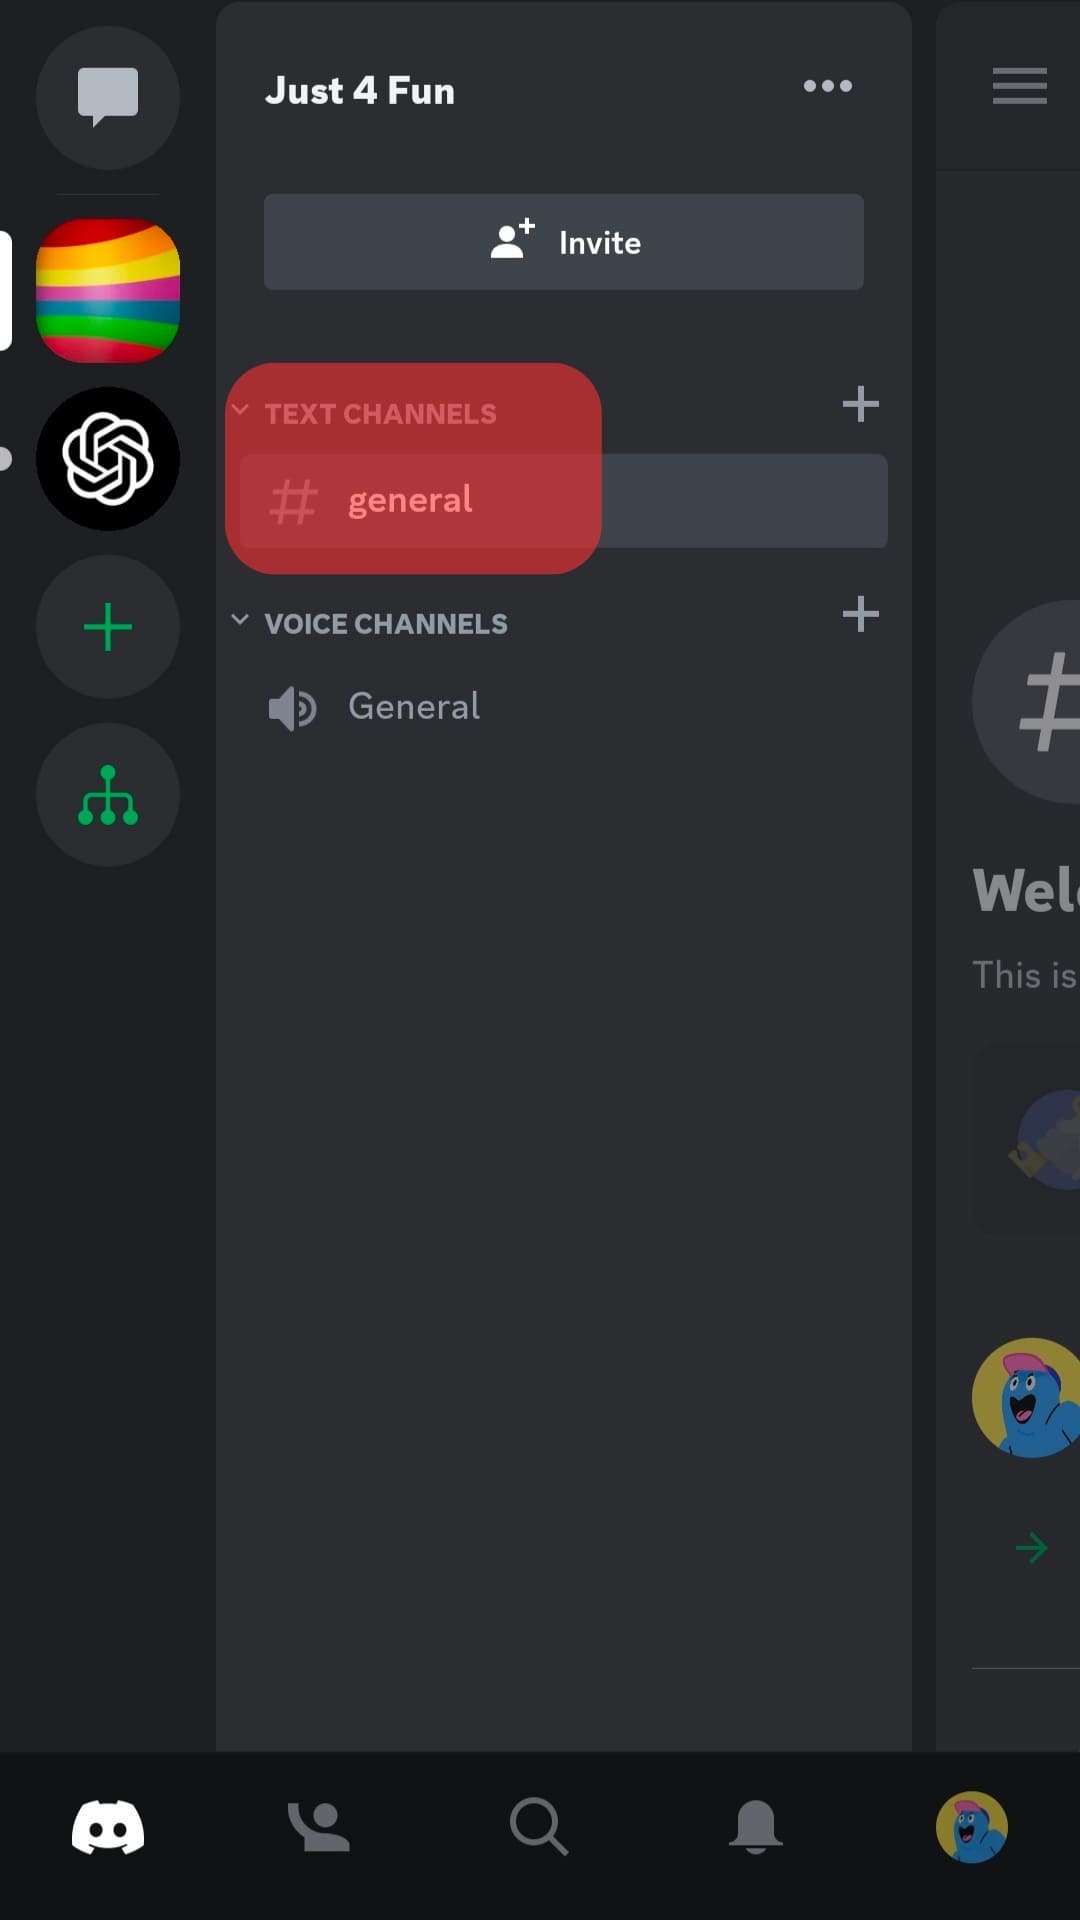 Tap And Hold On To The Discord Text Channel Section.